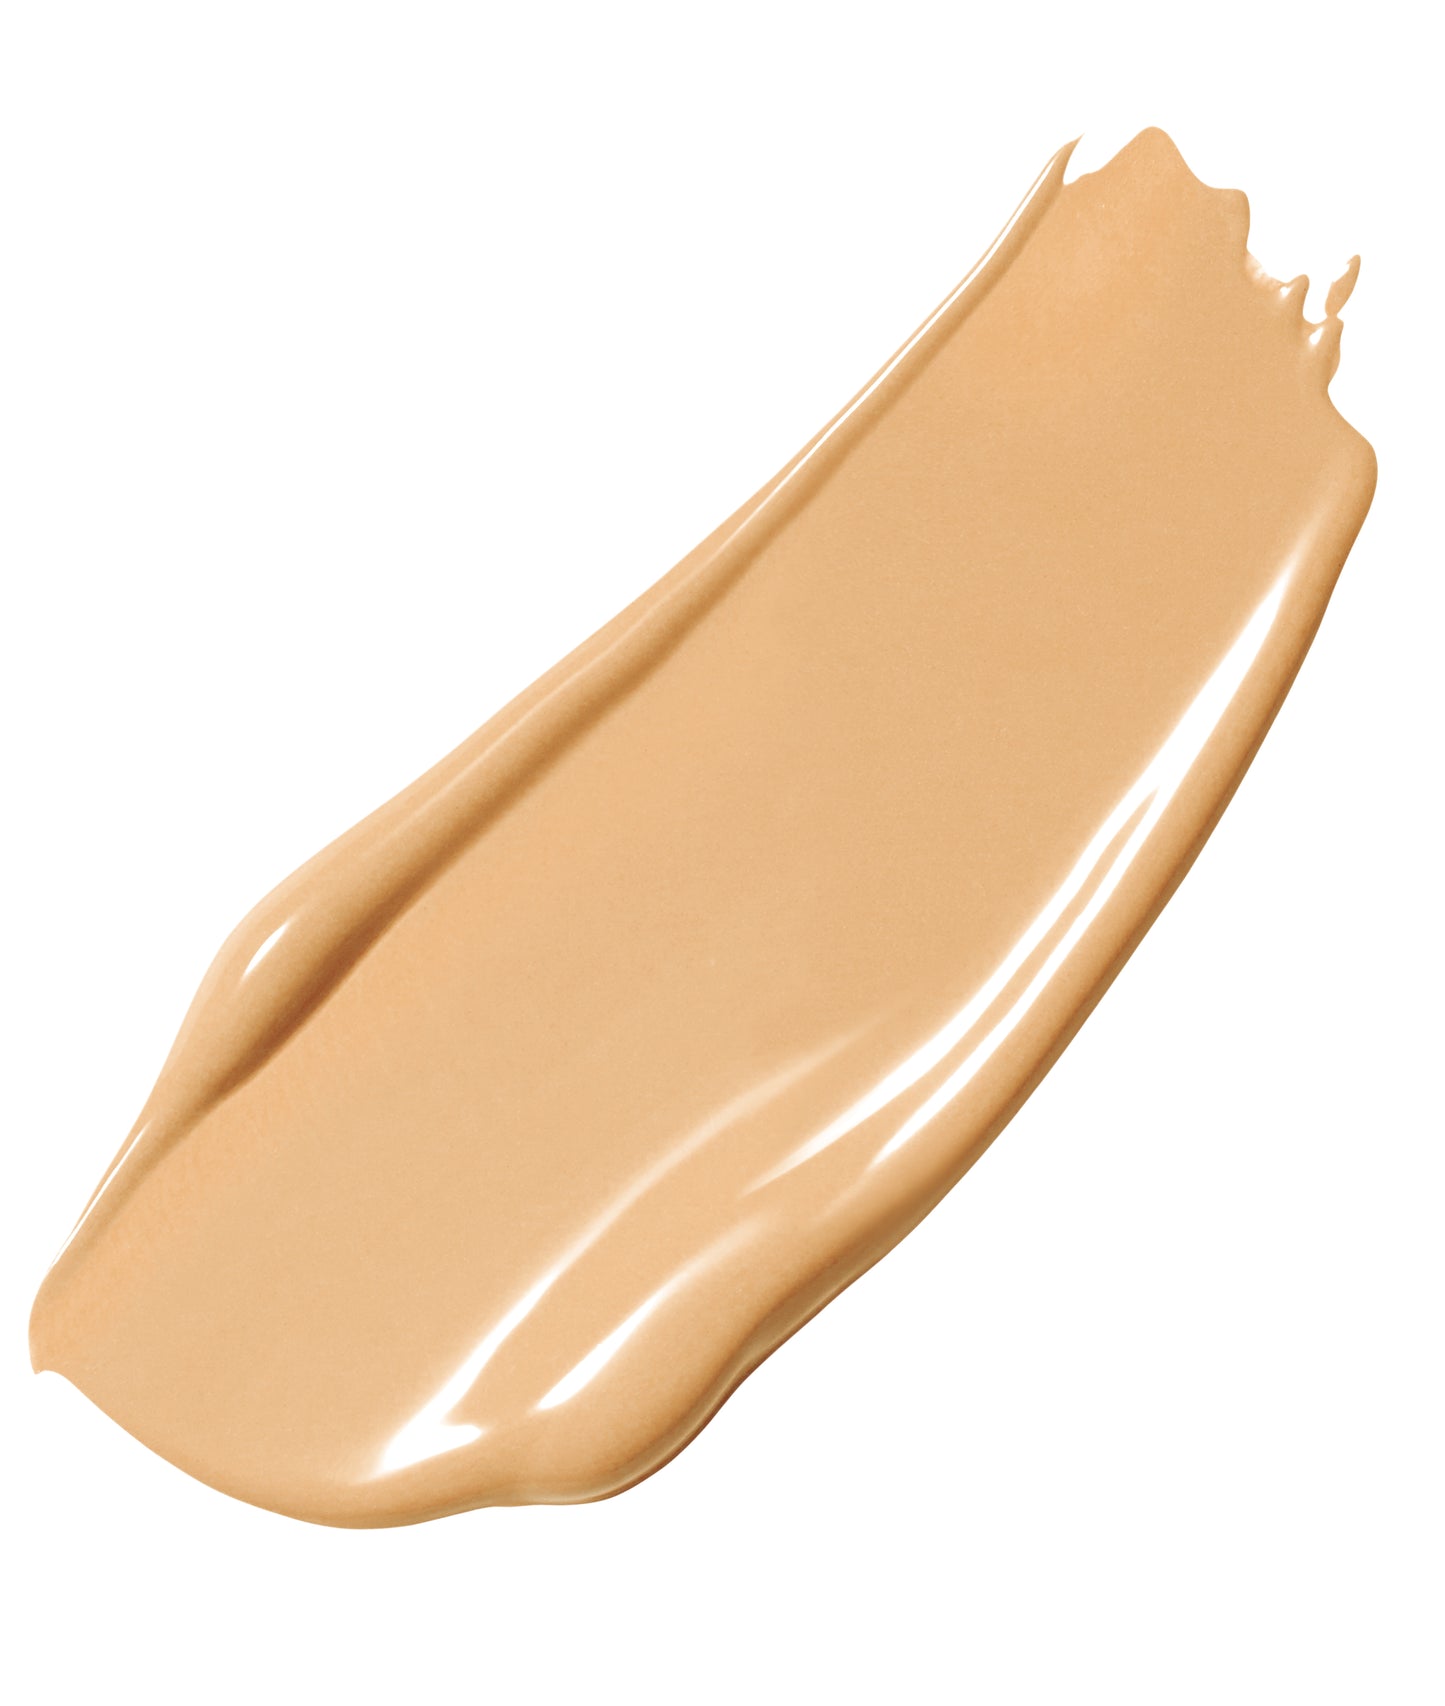 Flawless Lumiere Radiance-Perfecting Foundation